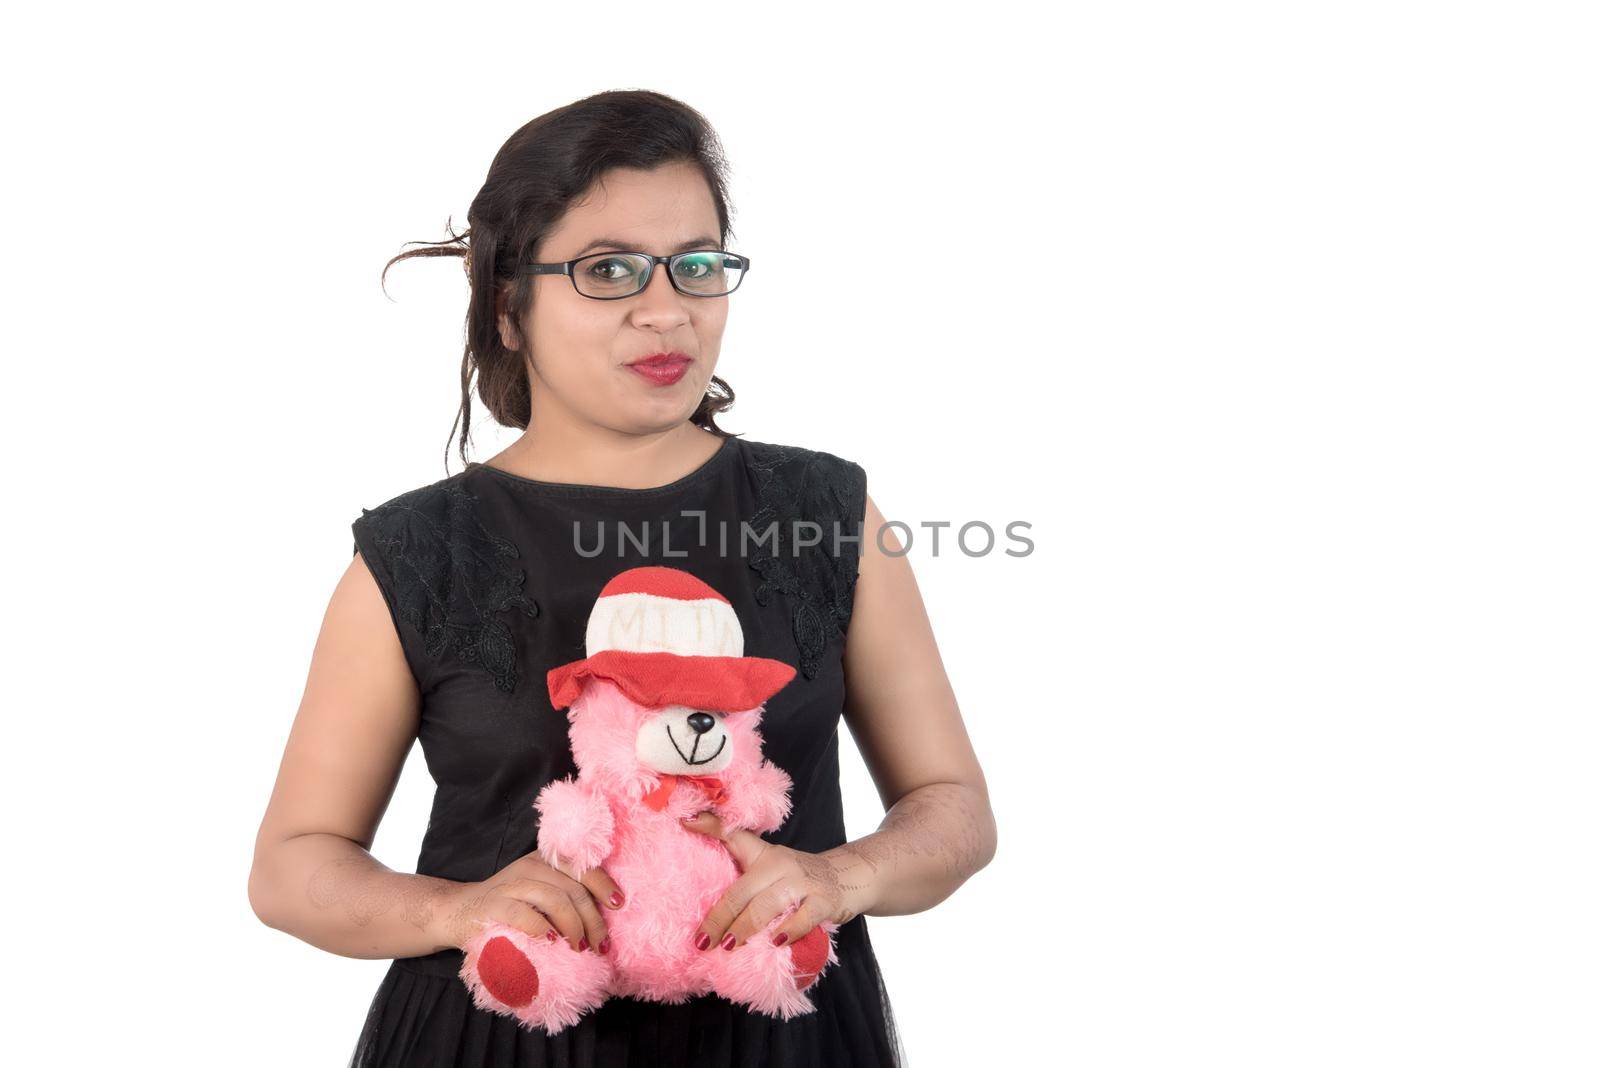 Beautiful young girl holding and playing with a teddy bear toy on a white background. by DipakShelare